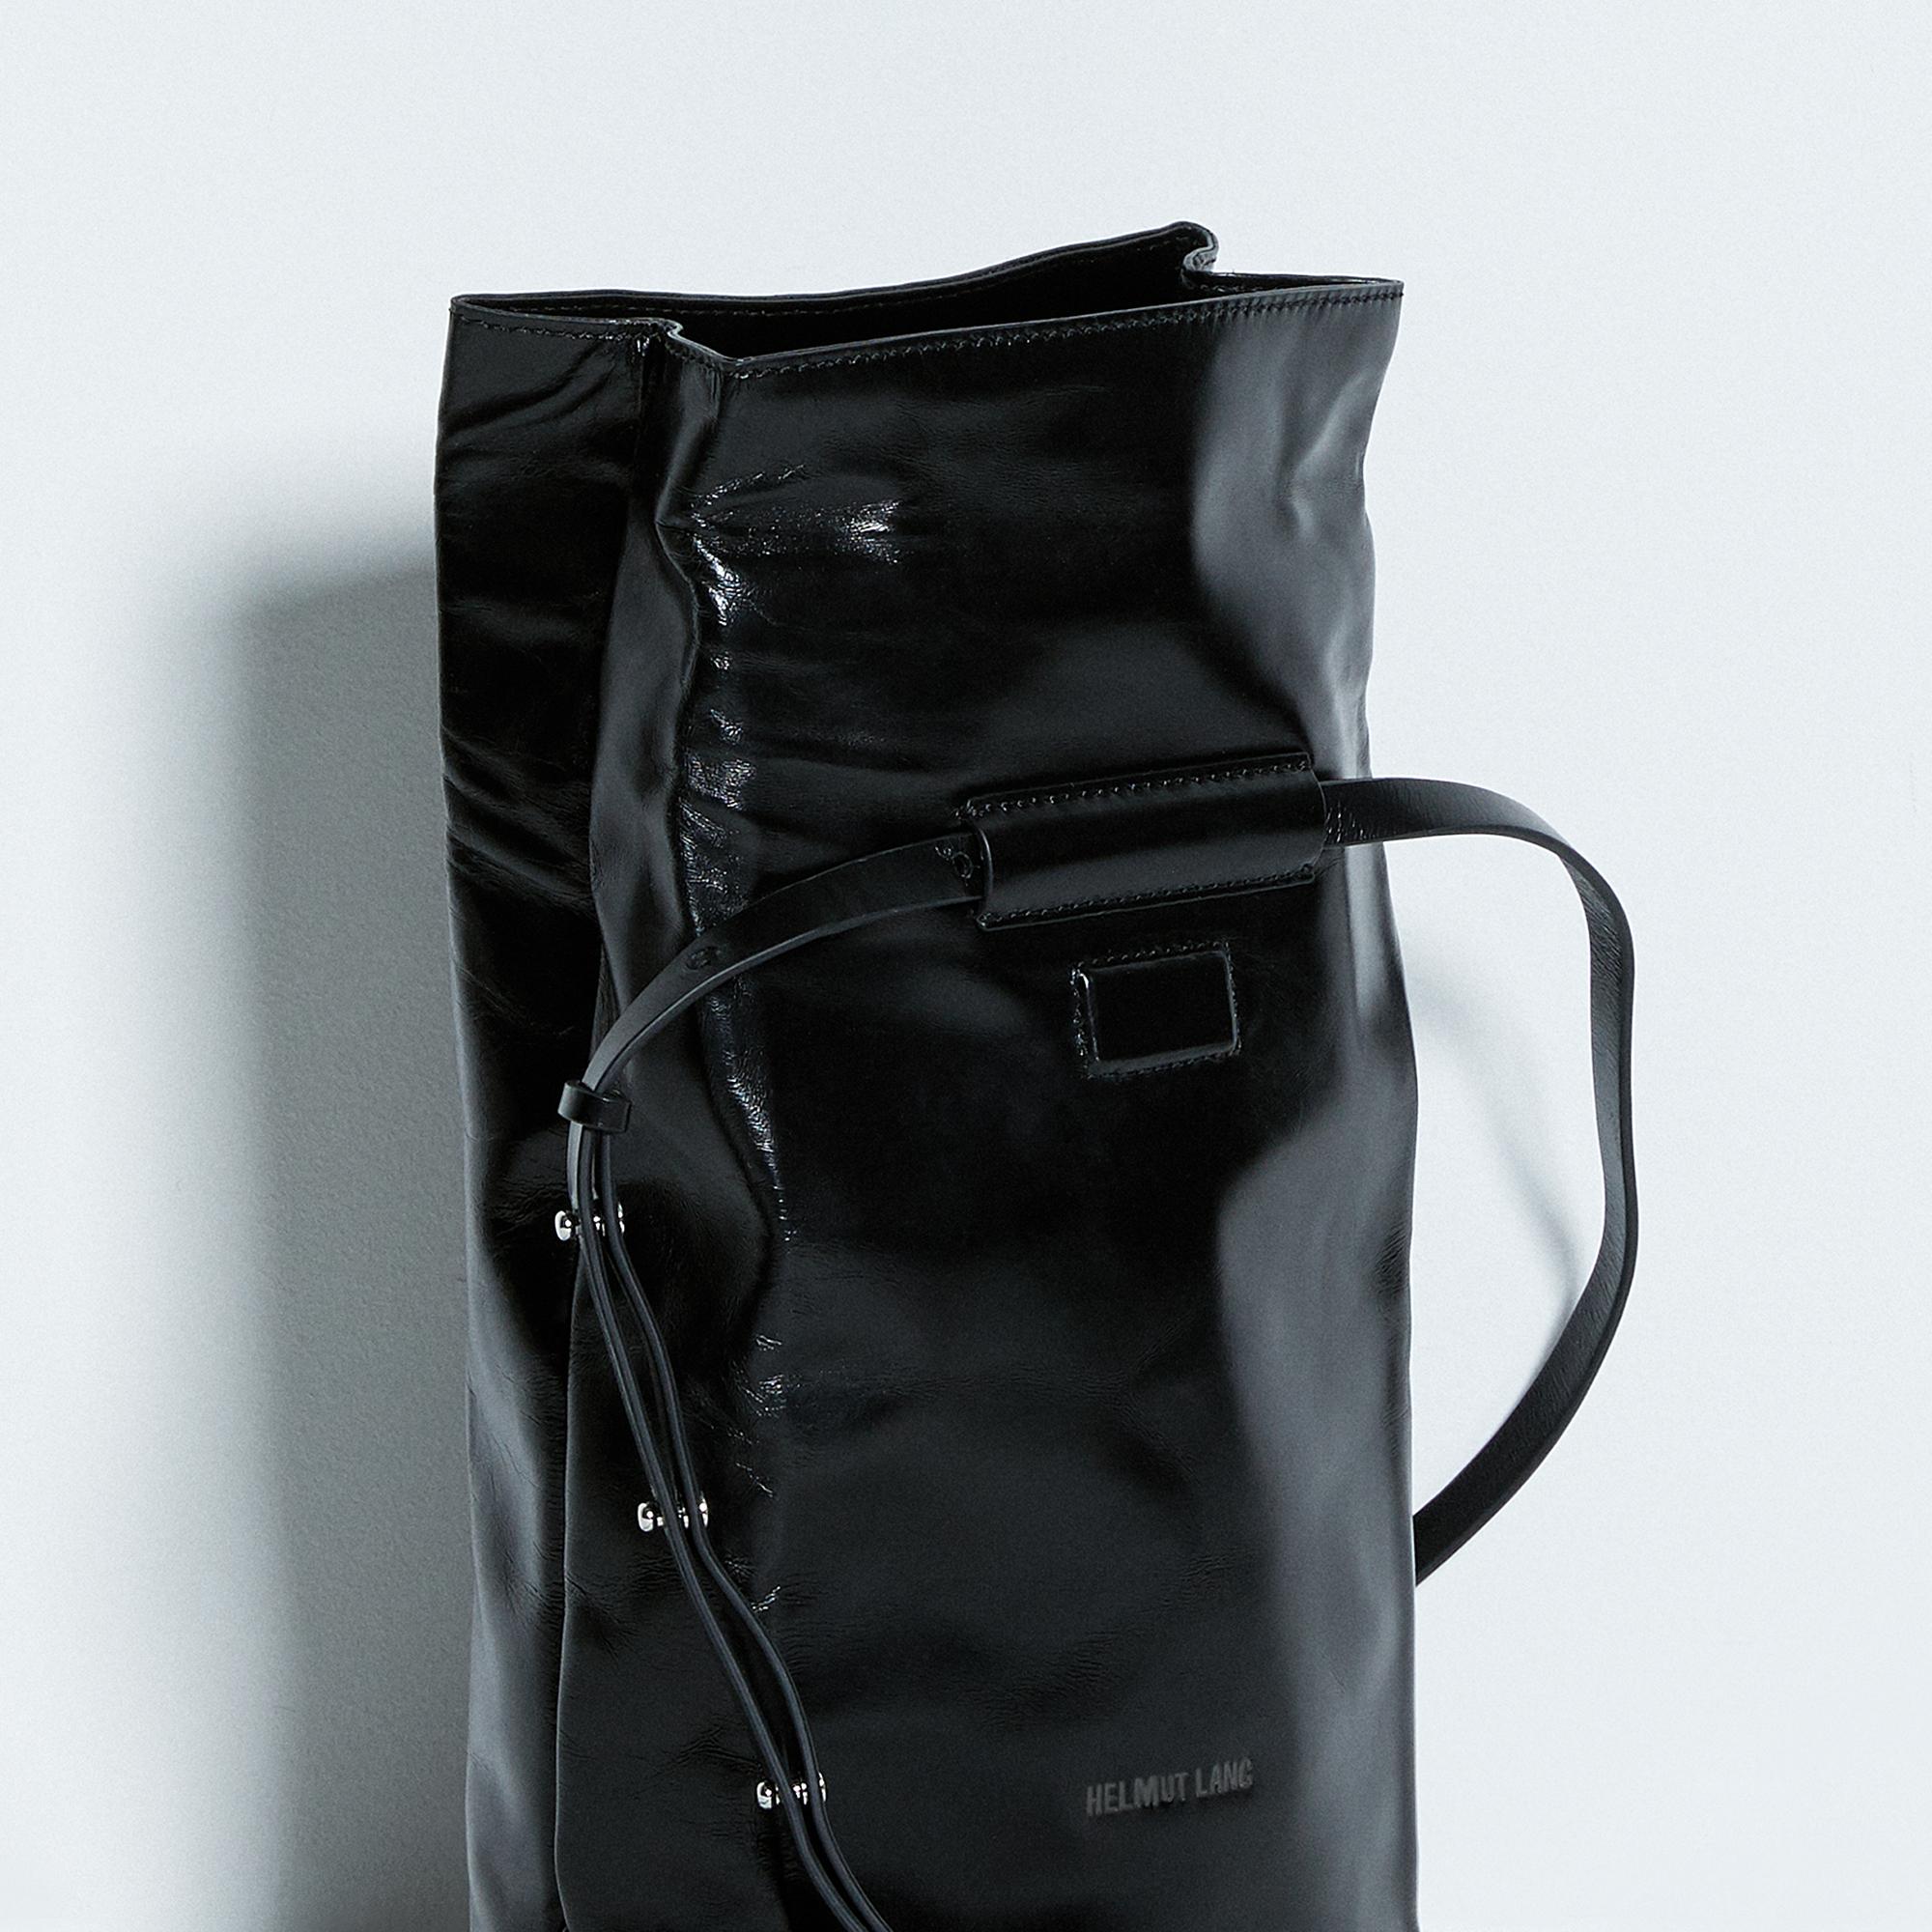 Bra Bags Anyone? Seen By Shayne Oliver for Helmut Lang Is Now